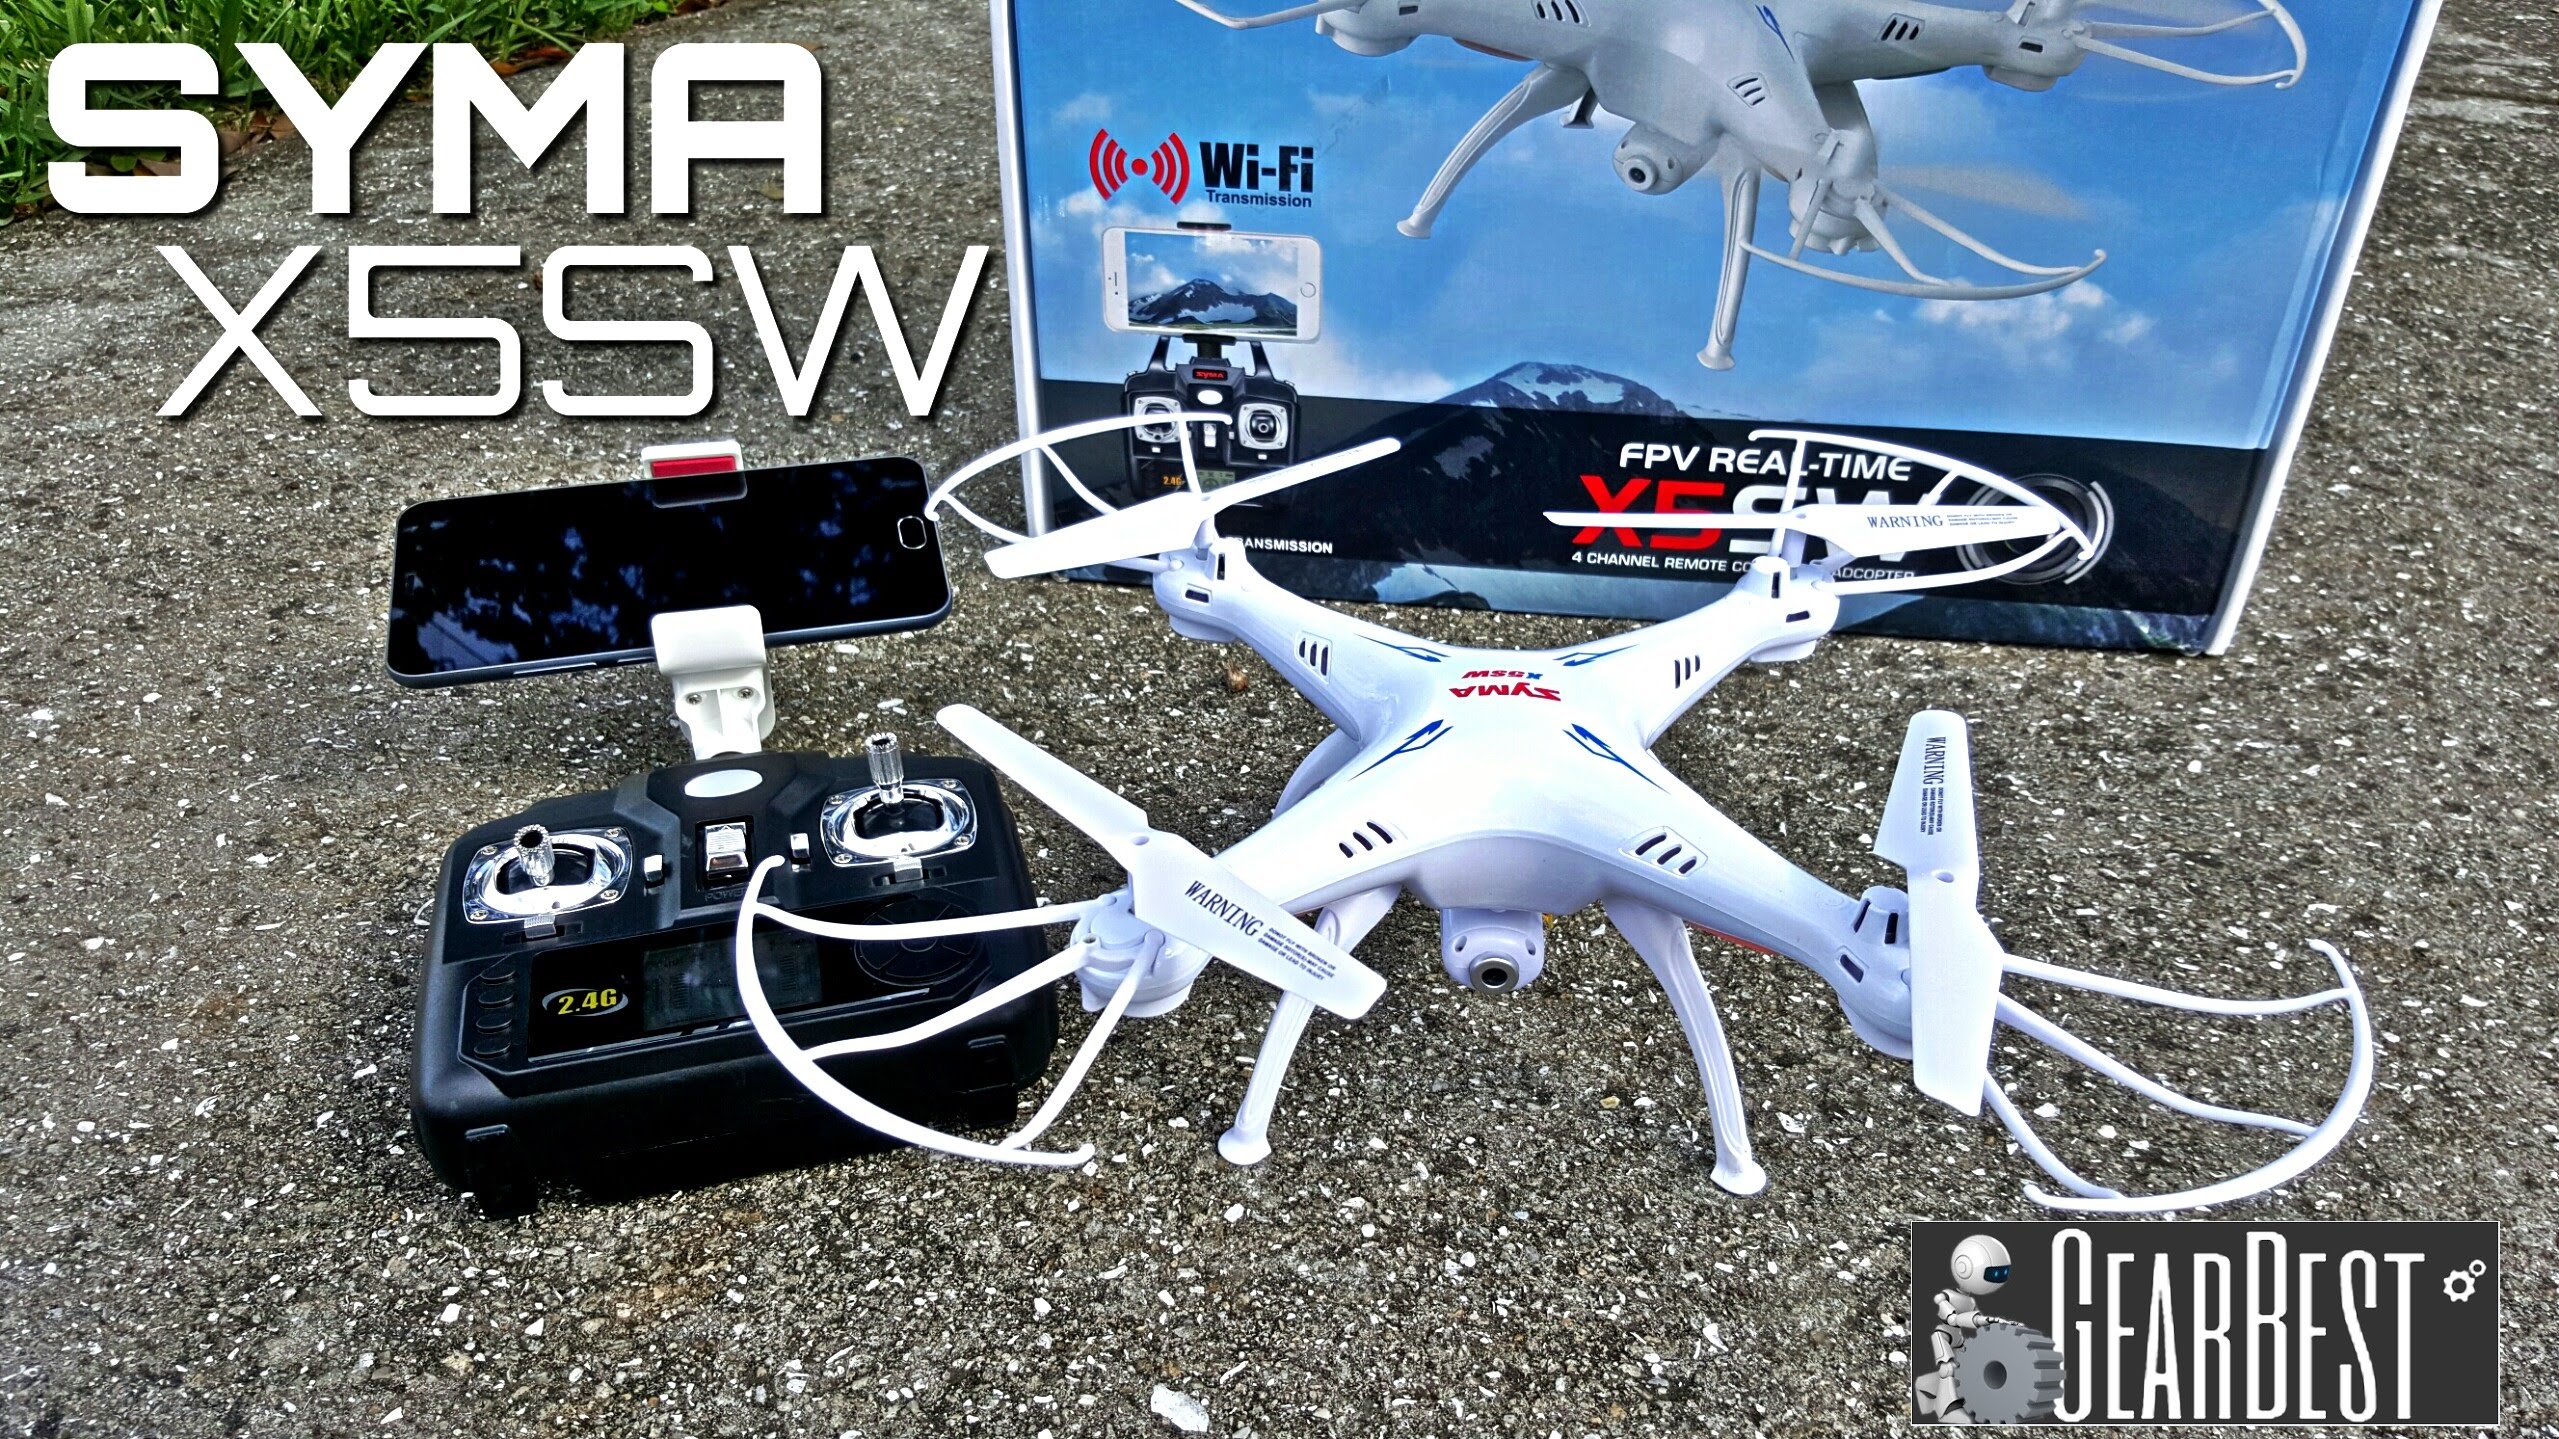 Syma X5SW Quadcopter – [Unboxing & Review] – 6 Axis – 2.4GHz – WIFI – FPV – 2MP Camera